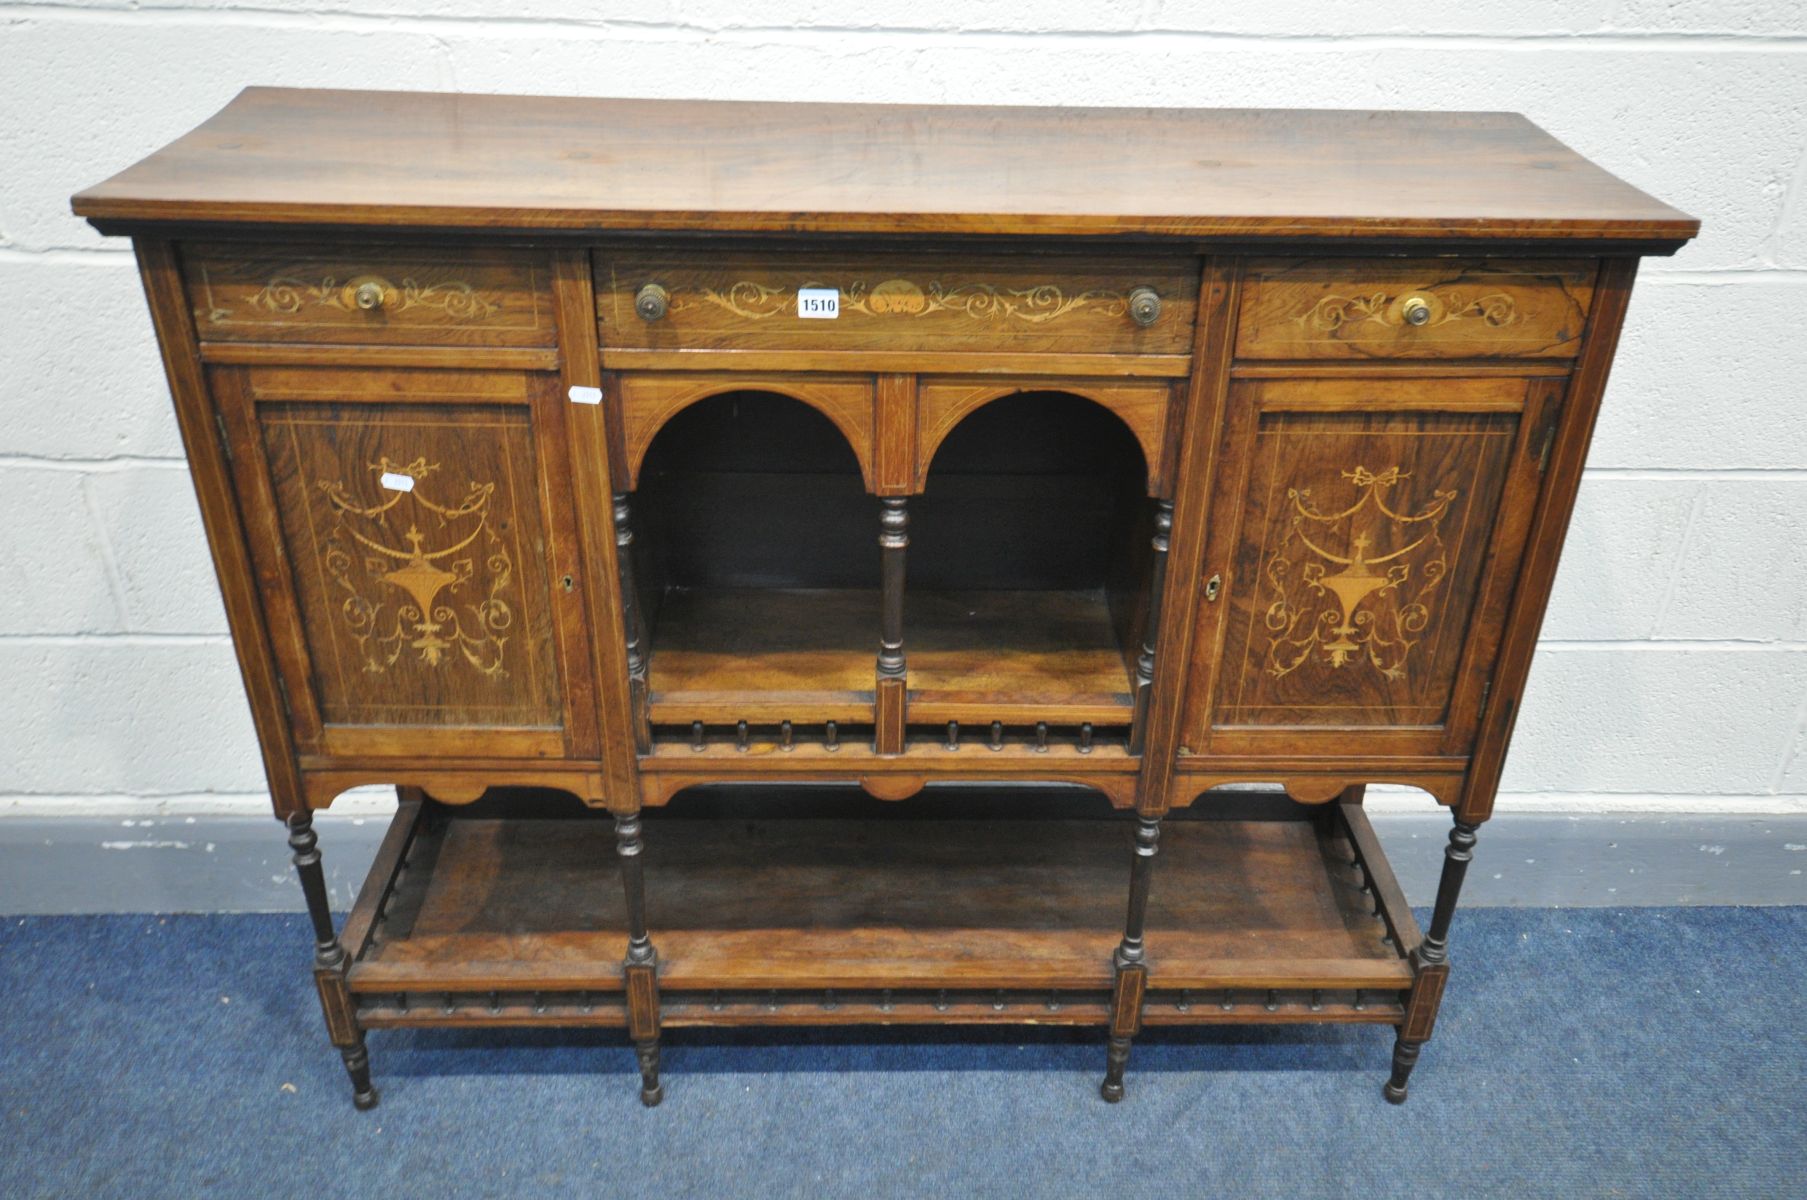 A 19TH CENTURY ROSEWOOD AND MARQUETRY INLAID SIDEBOARD, with an arrangement of drawers and